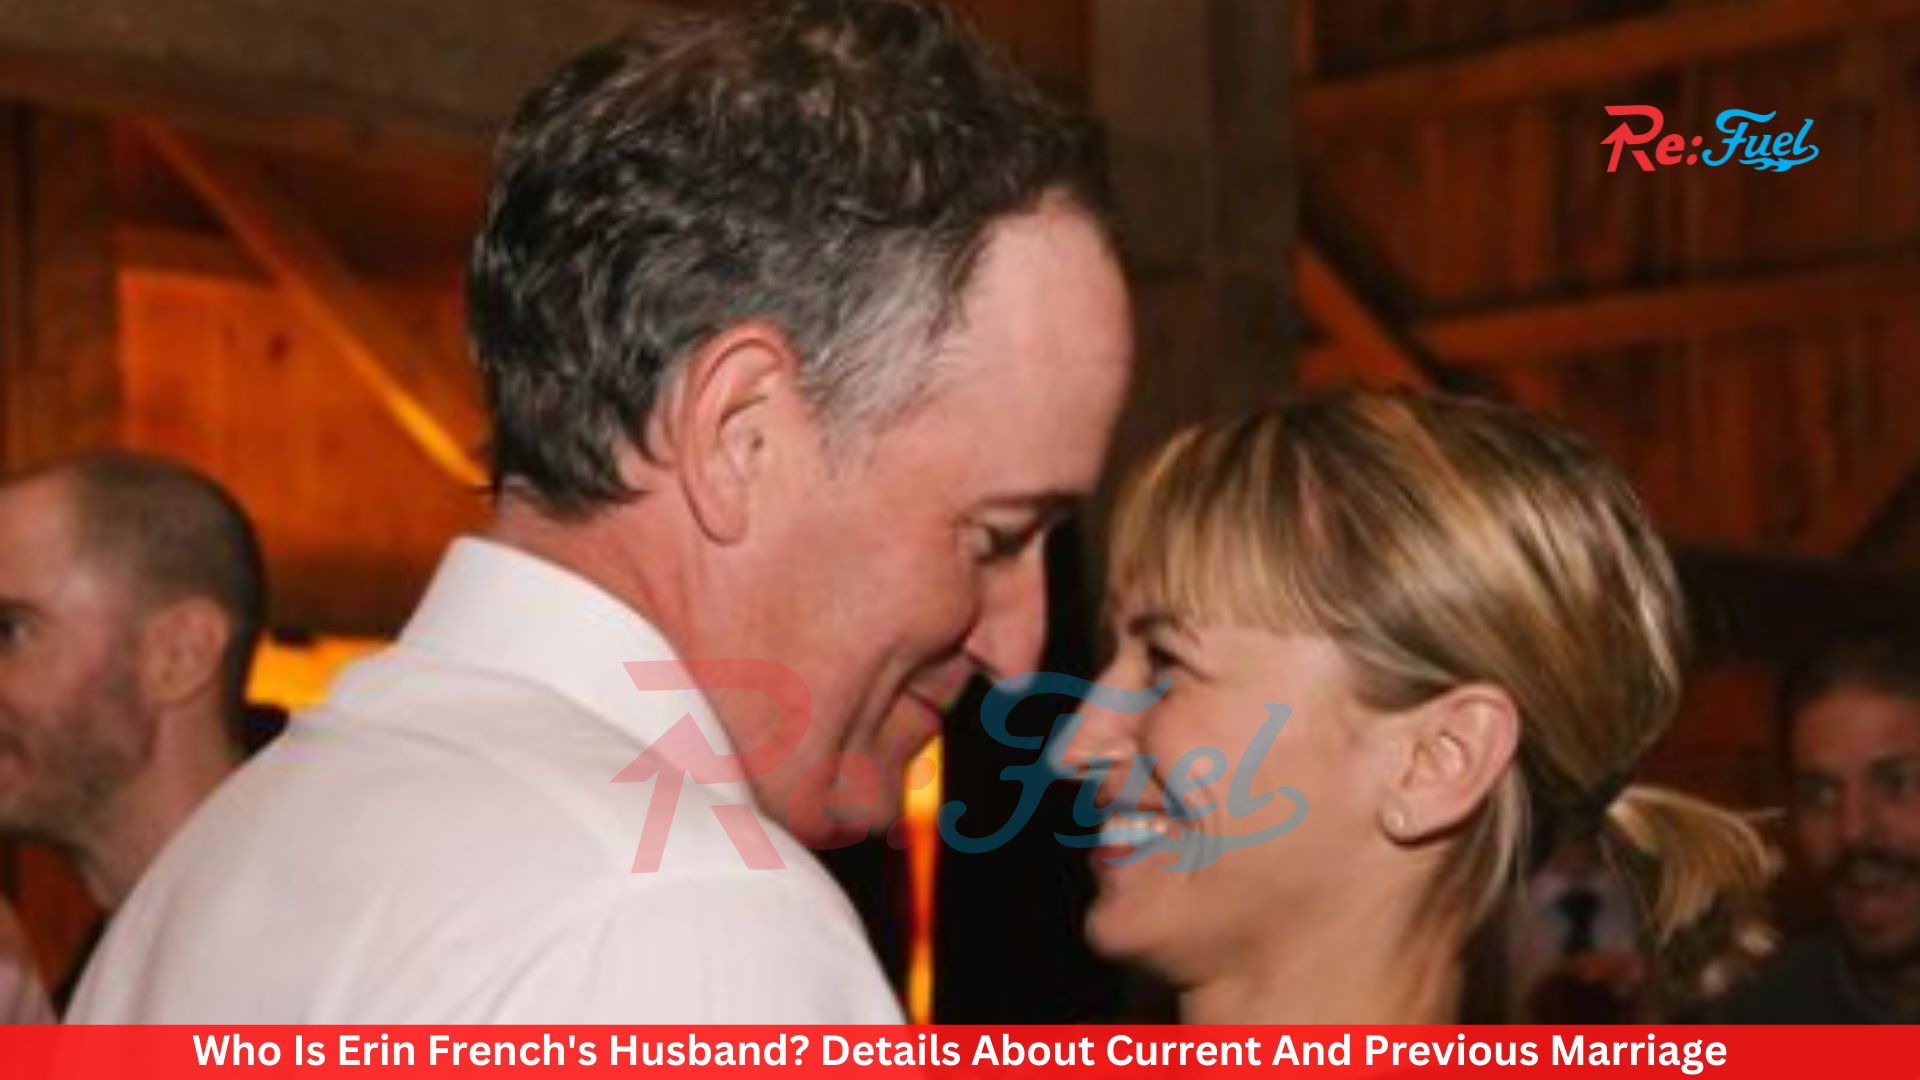 Who Is Erin French's Husband? Details About Current And Previous Marriage